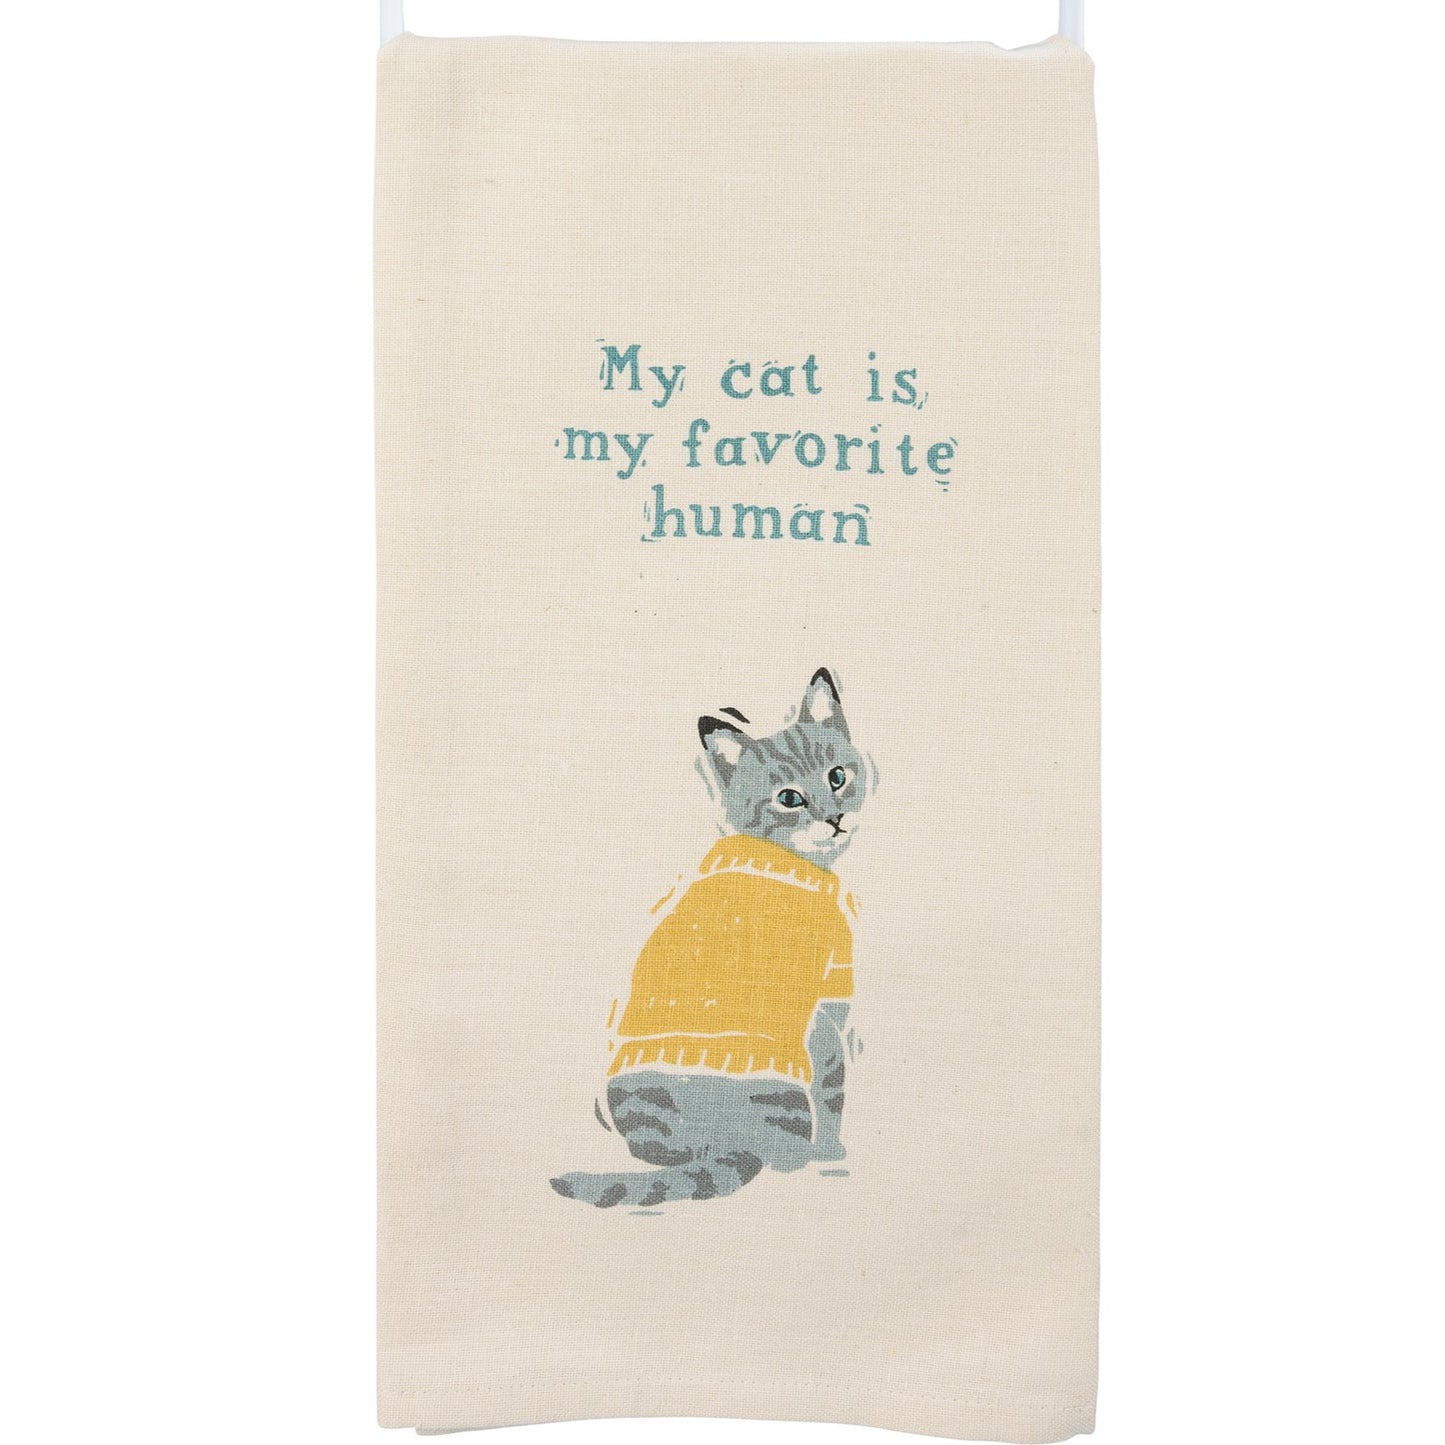 "My Cat Is My Favorite Human" - Cat themed Kitchen Towel